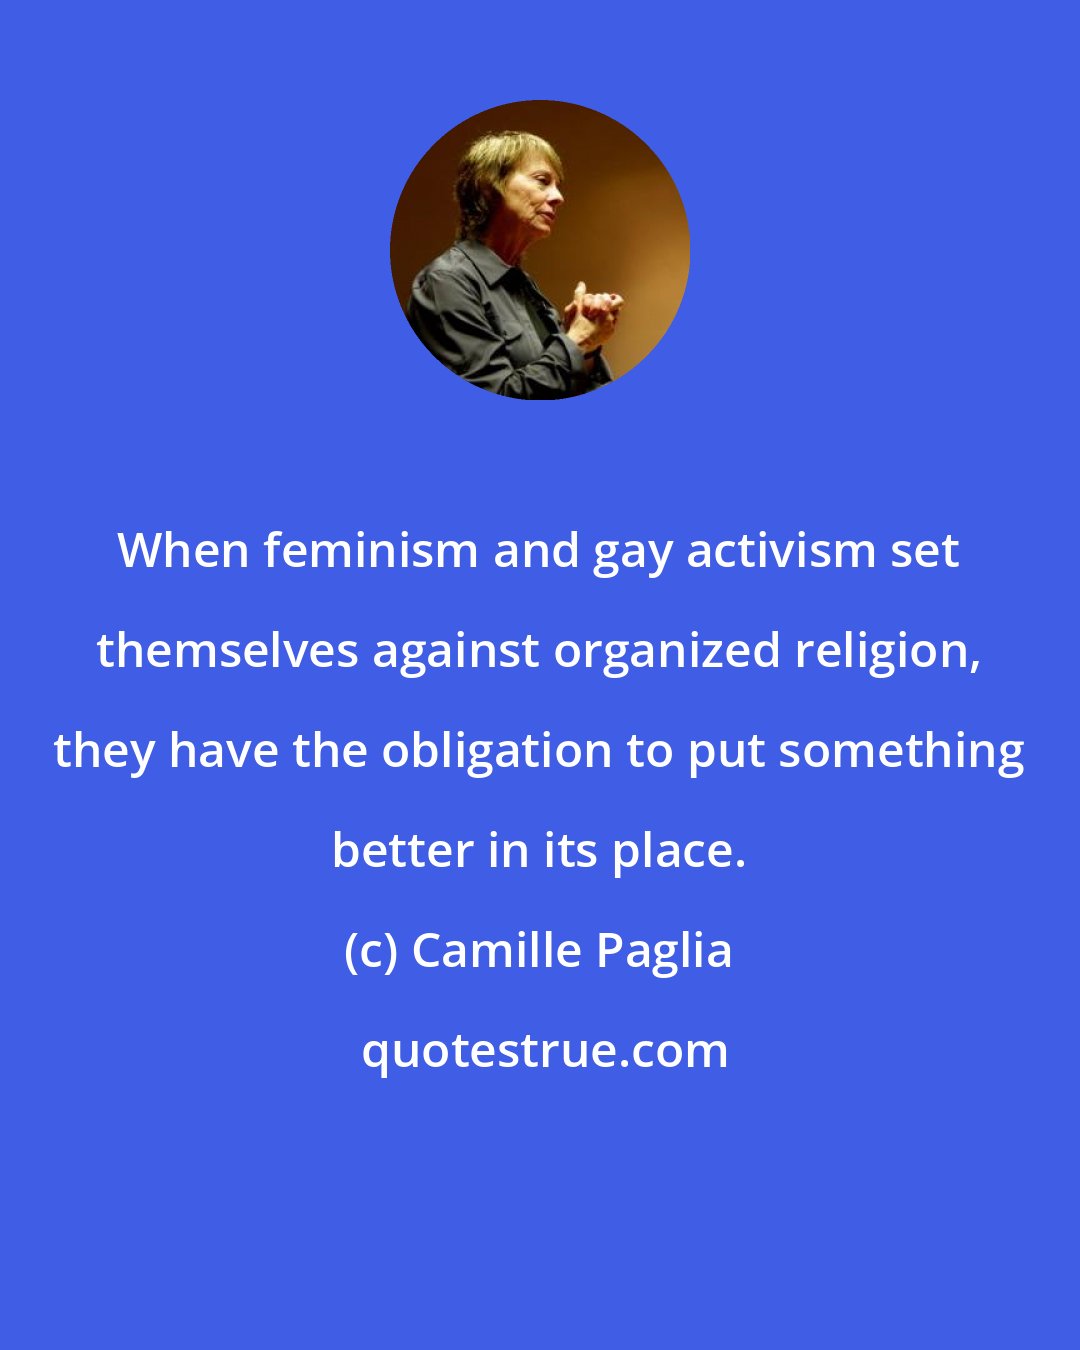 Camille Paglia: When feminism and gay activism set themselves against organized religion, they have the obligation to put something better in its place.